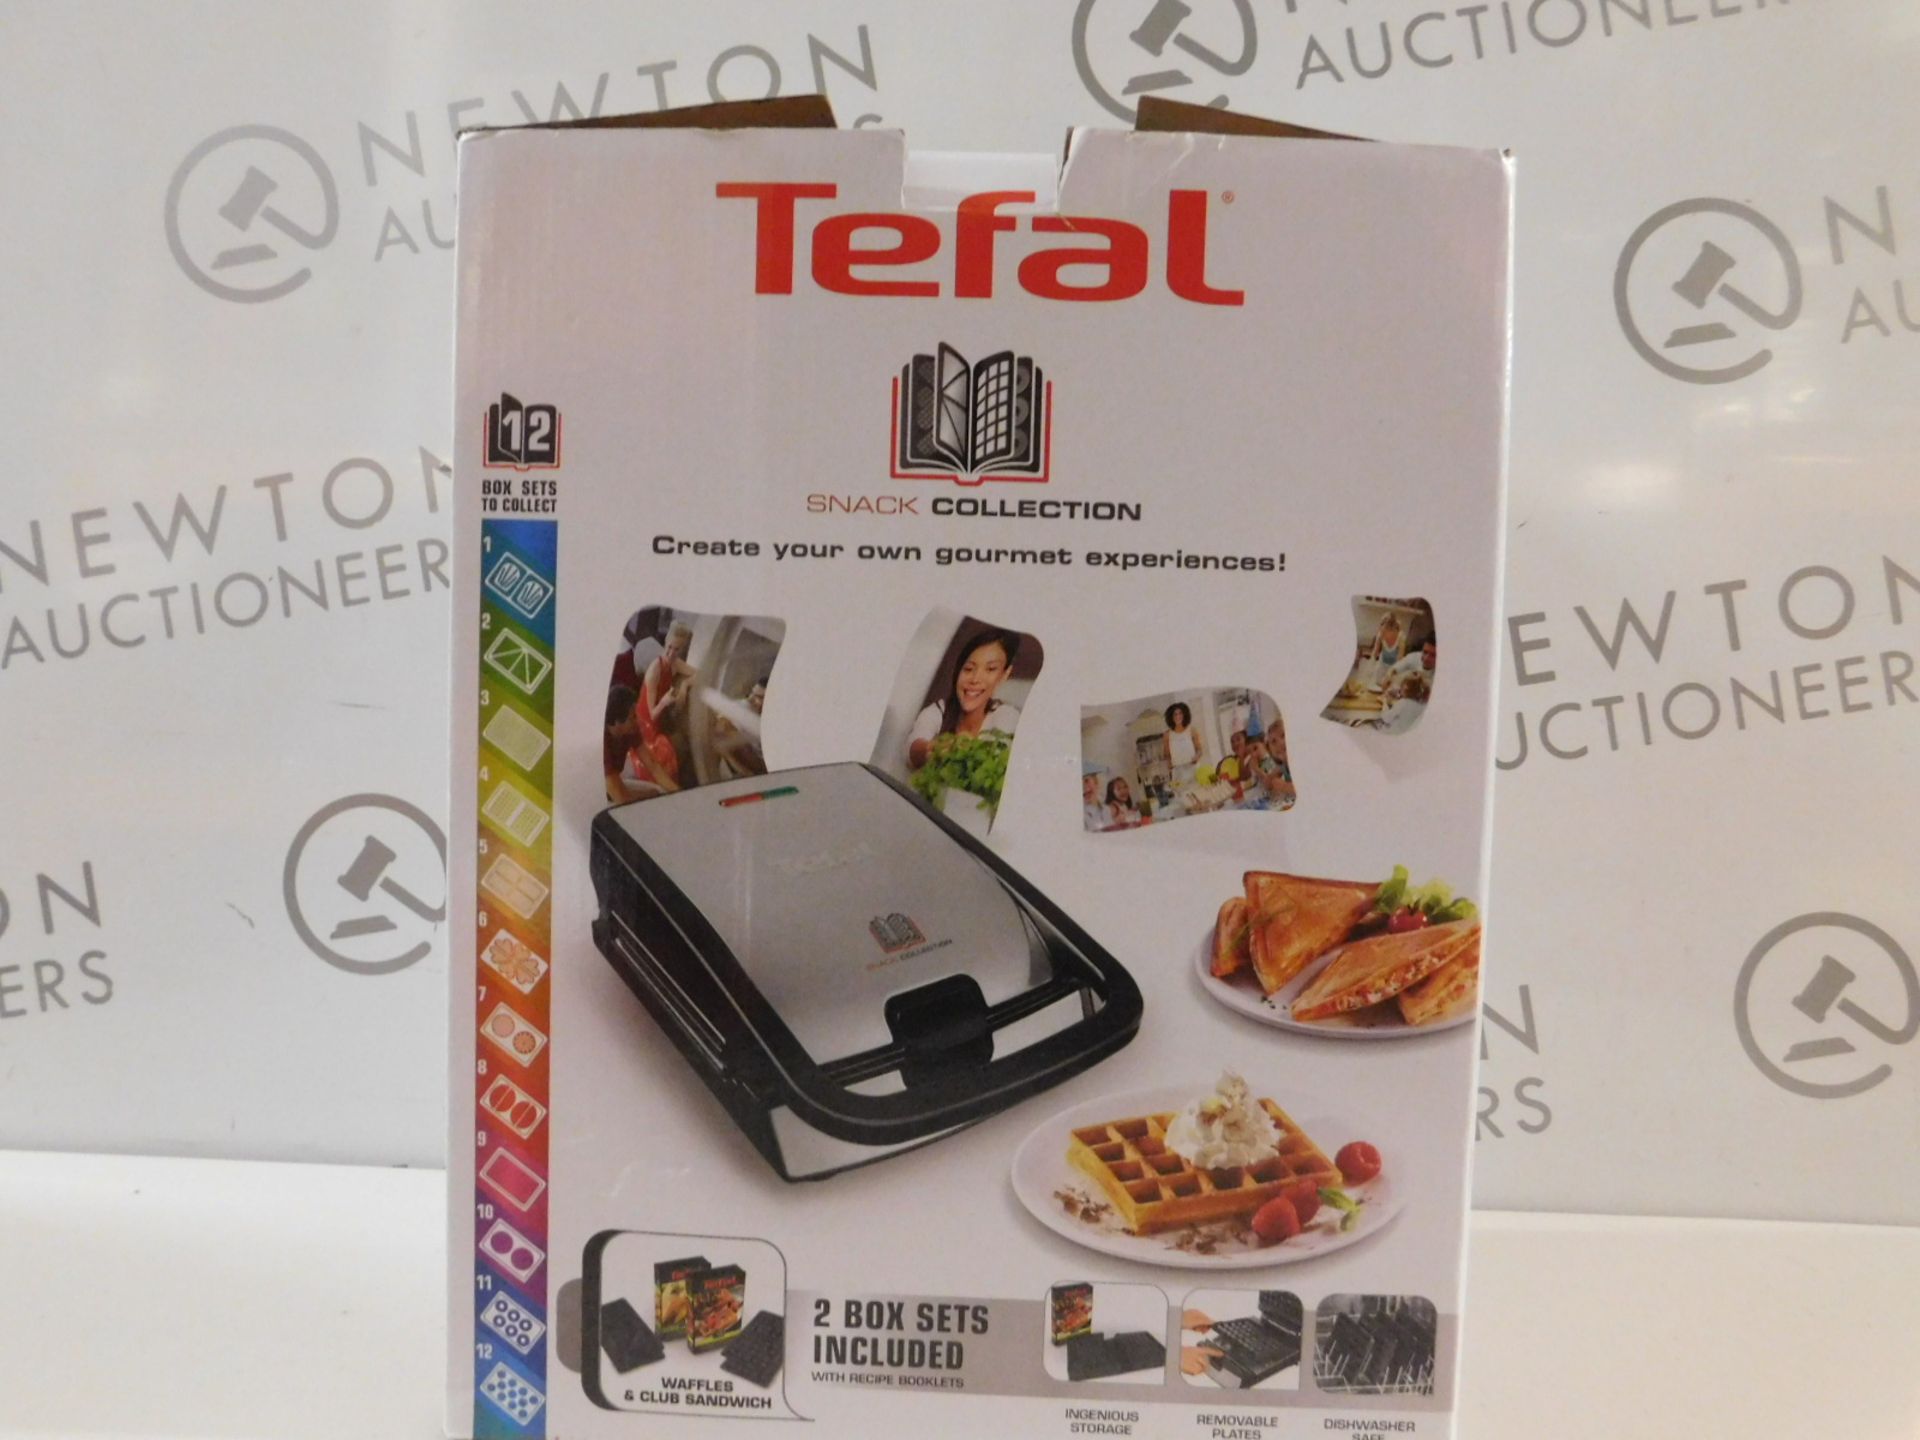 1 BOXED TEFAL SW852D27 SNACK COLLECTION MULTI-FUNCTION SANDWICH & SNACK MAKER WITH INTERCHANGEABLE